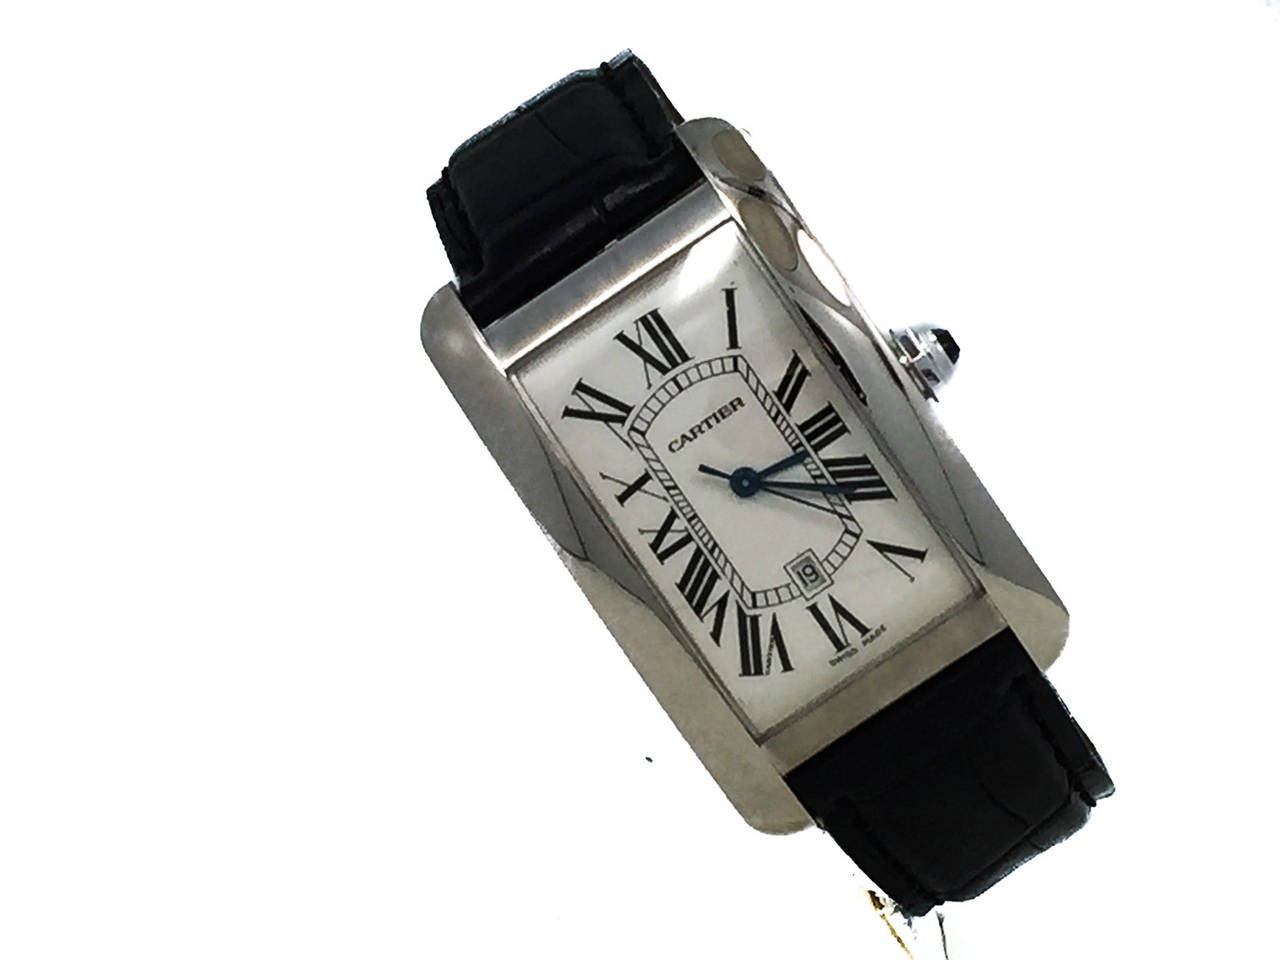 For Sale is a Mens Large Cartier Tank Americaine Automatic Winding Powered Watch in 18k White Gold, Ref W2603256, Retails $16800. The Watch is on a Cartier Strap & Cartier 18k Tang Buckle. No Box Or Papers.